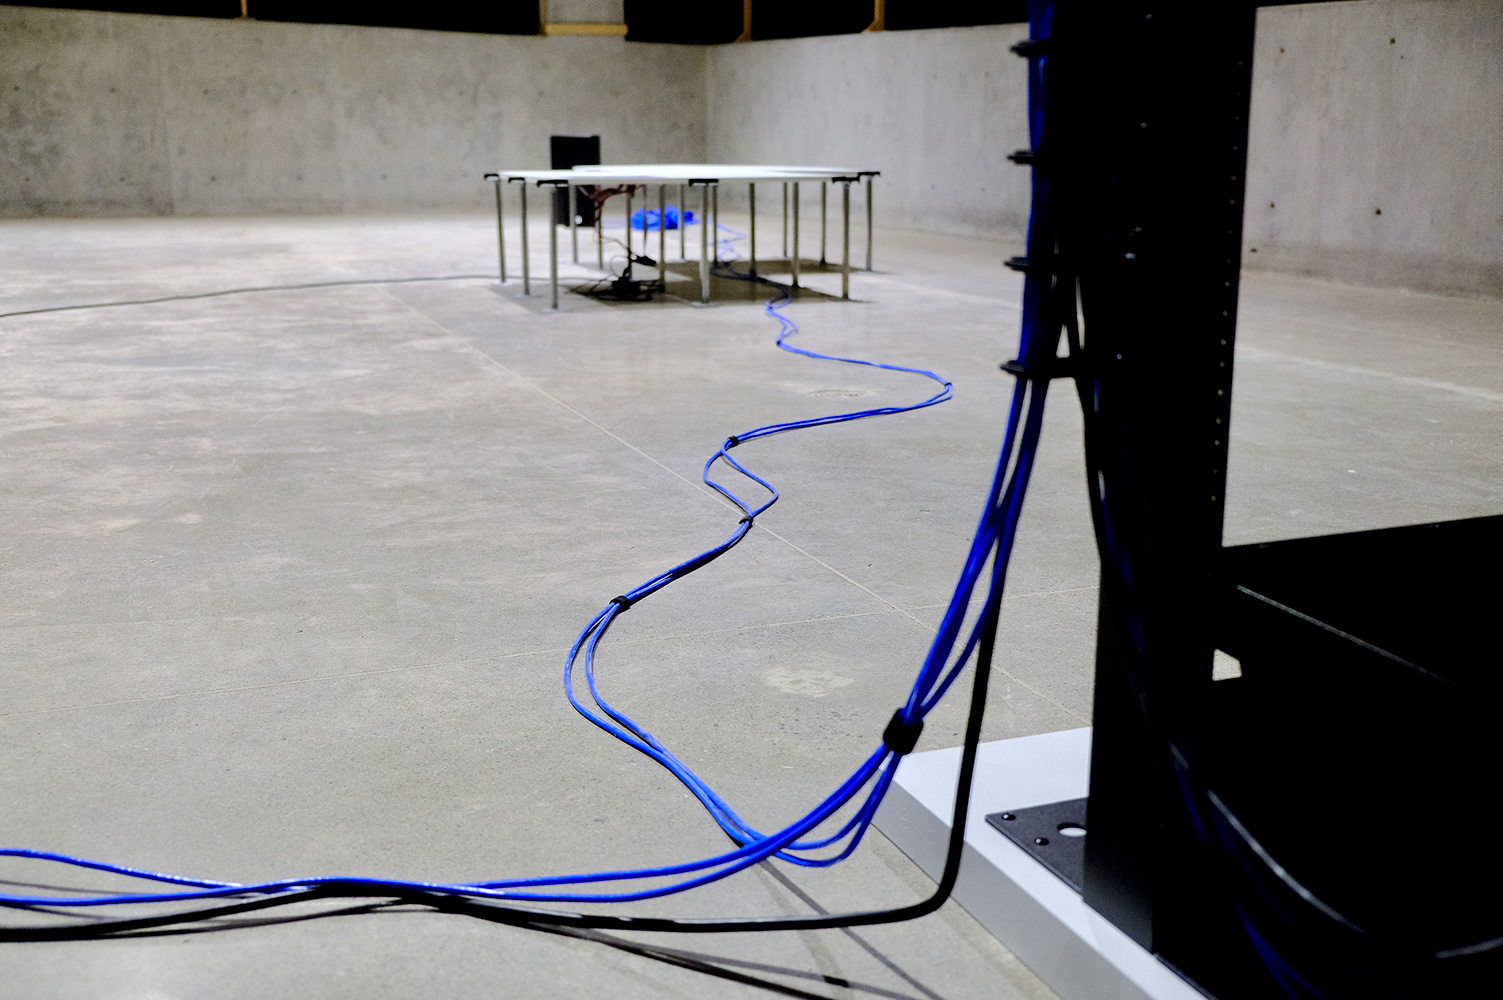 A closeup of the blue ethernet cable exiting the bottom of the server rack and snaking along the floor towards the set of speakers in the distance, running under one of the modular platforms.